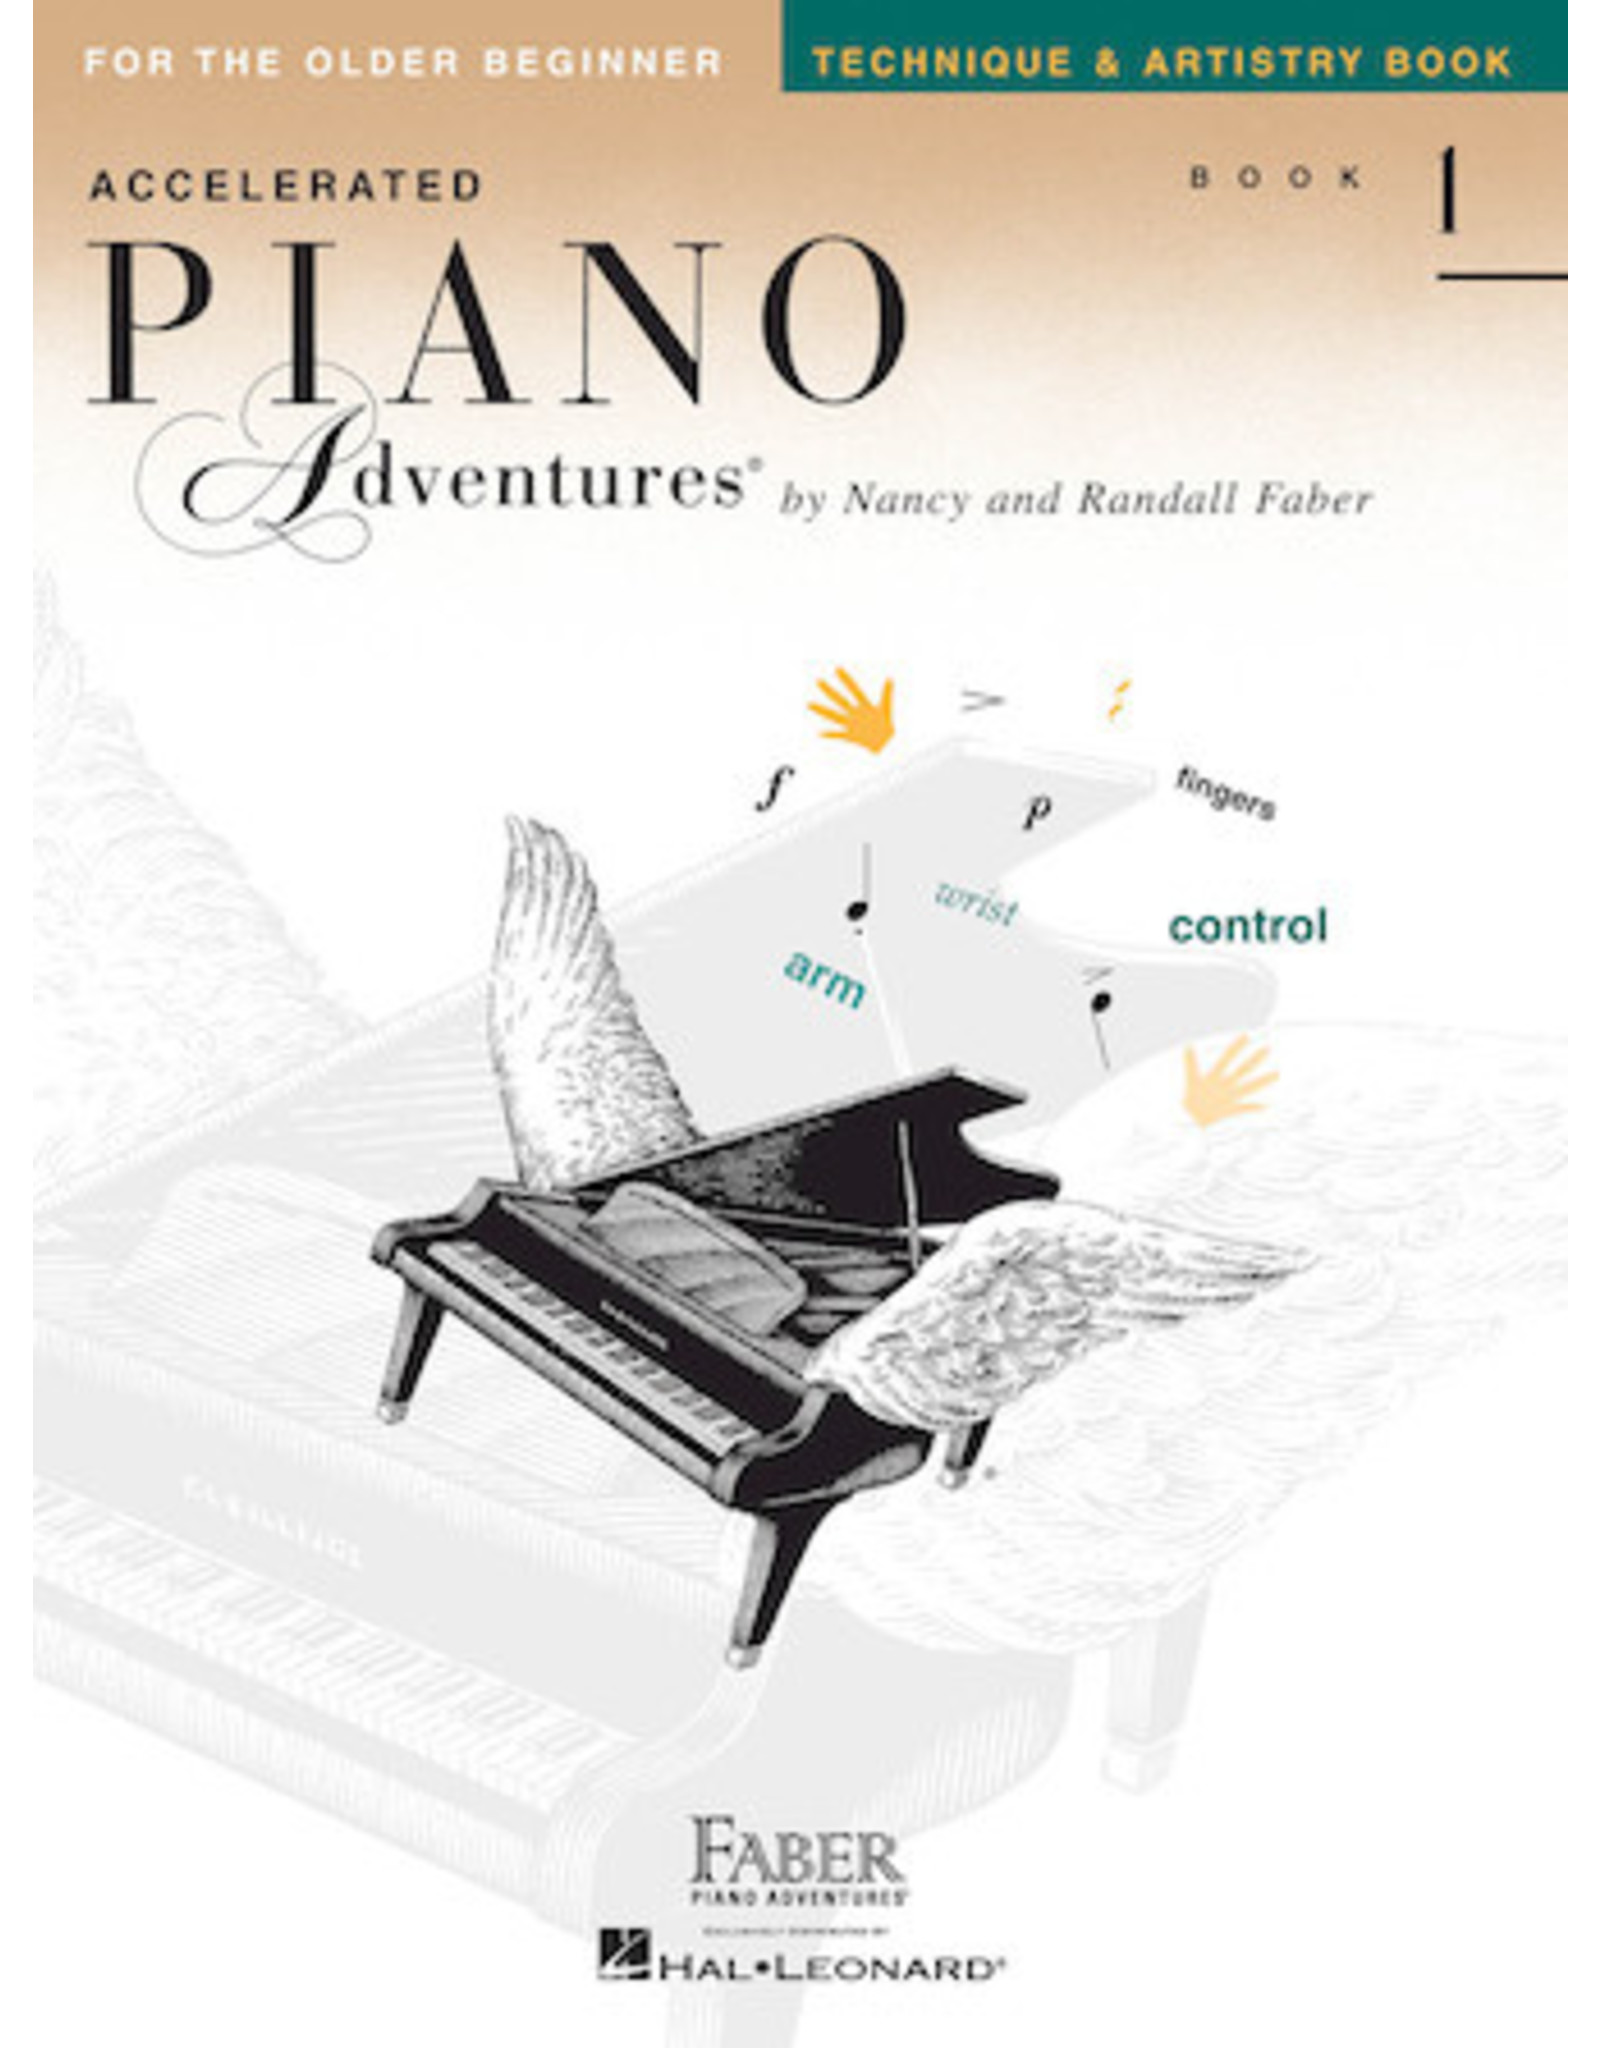 Hal Leonard Accelerated Piano Adventures for the Older Beginner Technique & Artistry, Book 1 Faber Piano Adventures